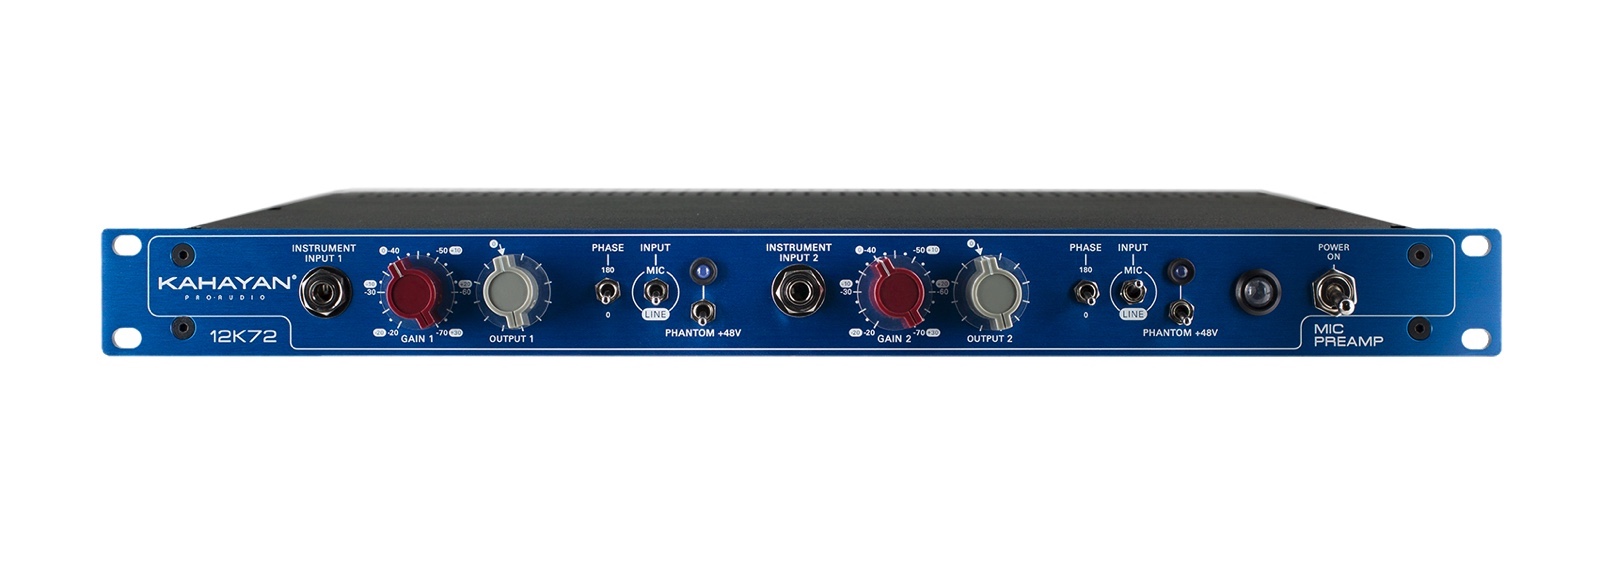 KAHAYAN PRO AUDIO 12K72 PREAMP - RECONDITIONNE